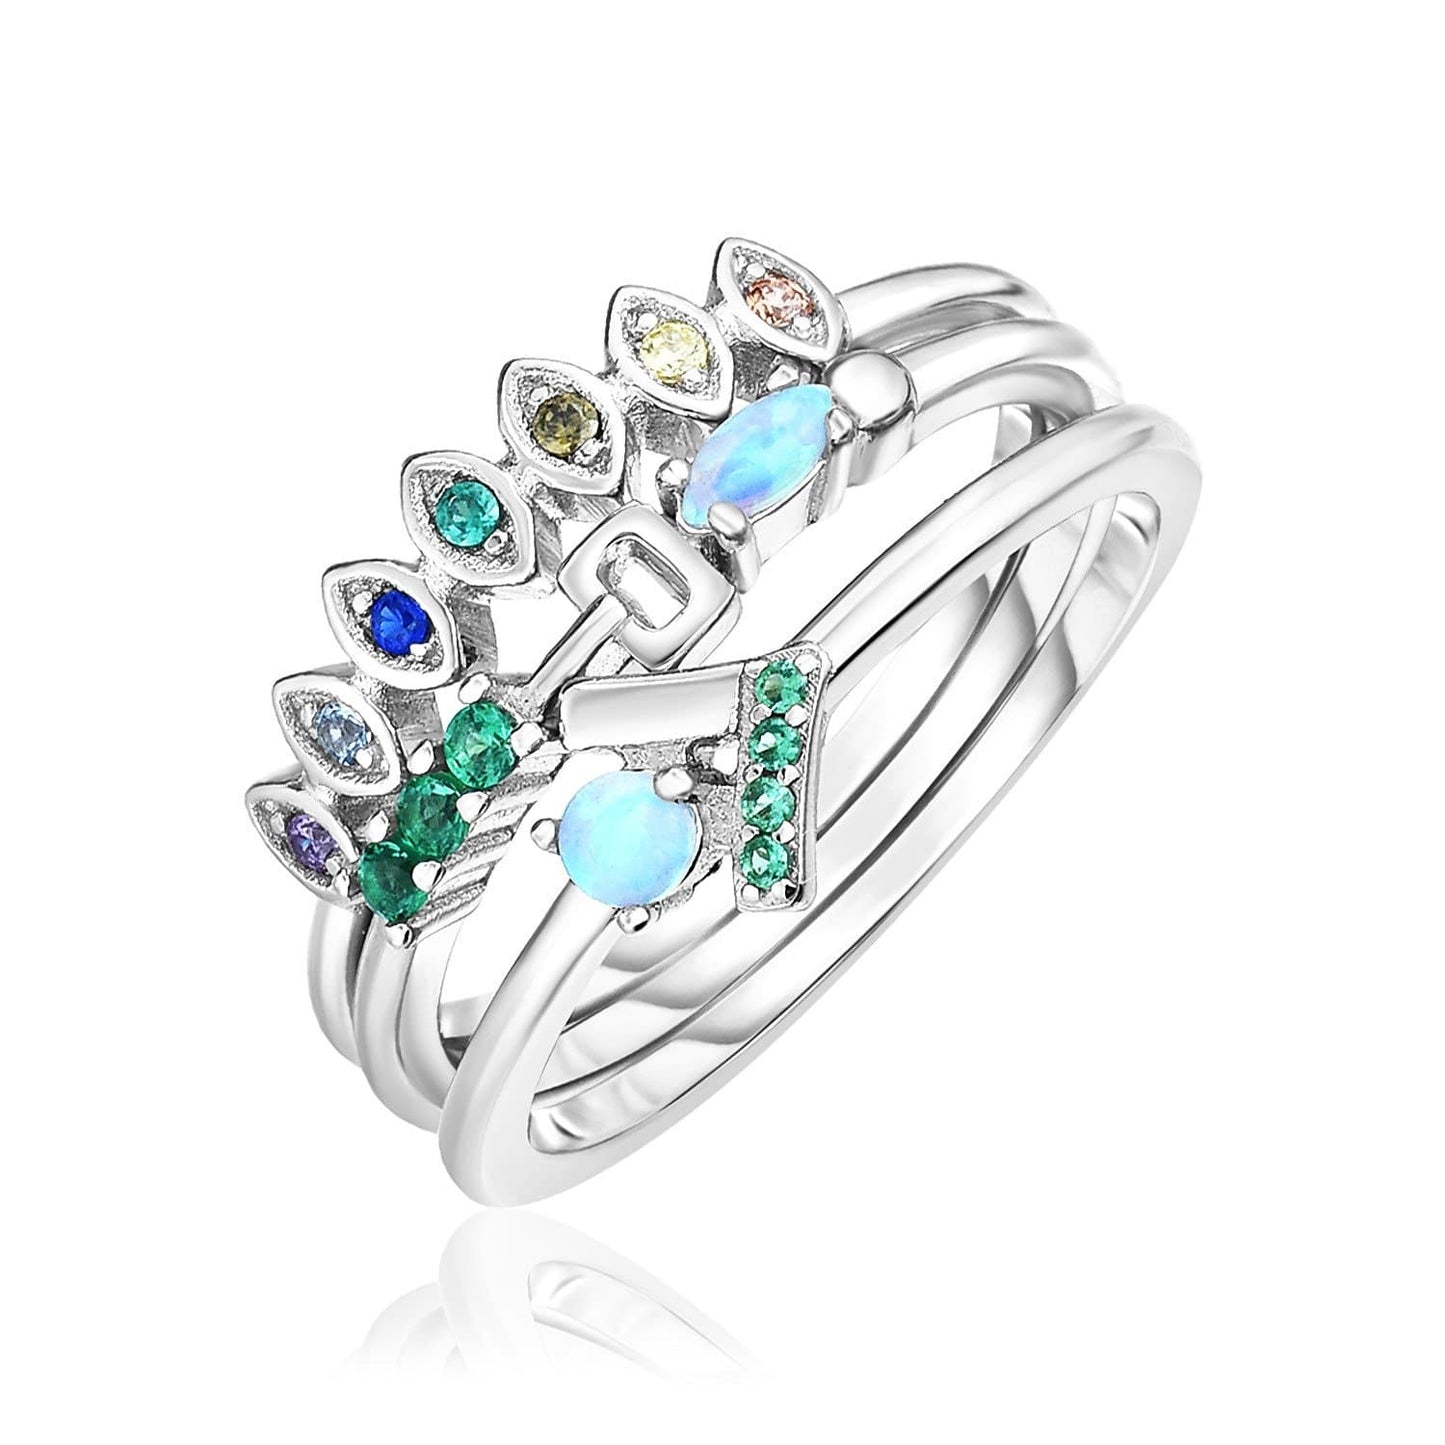 Sterling Silver Three Piece Stackable Set with Blue and Green Cubic Zirconias